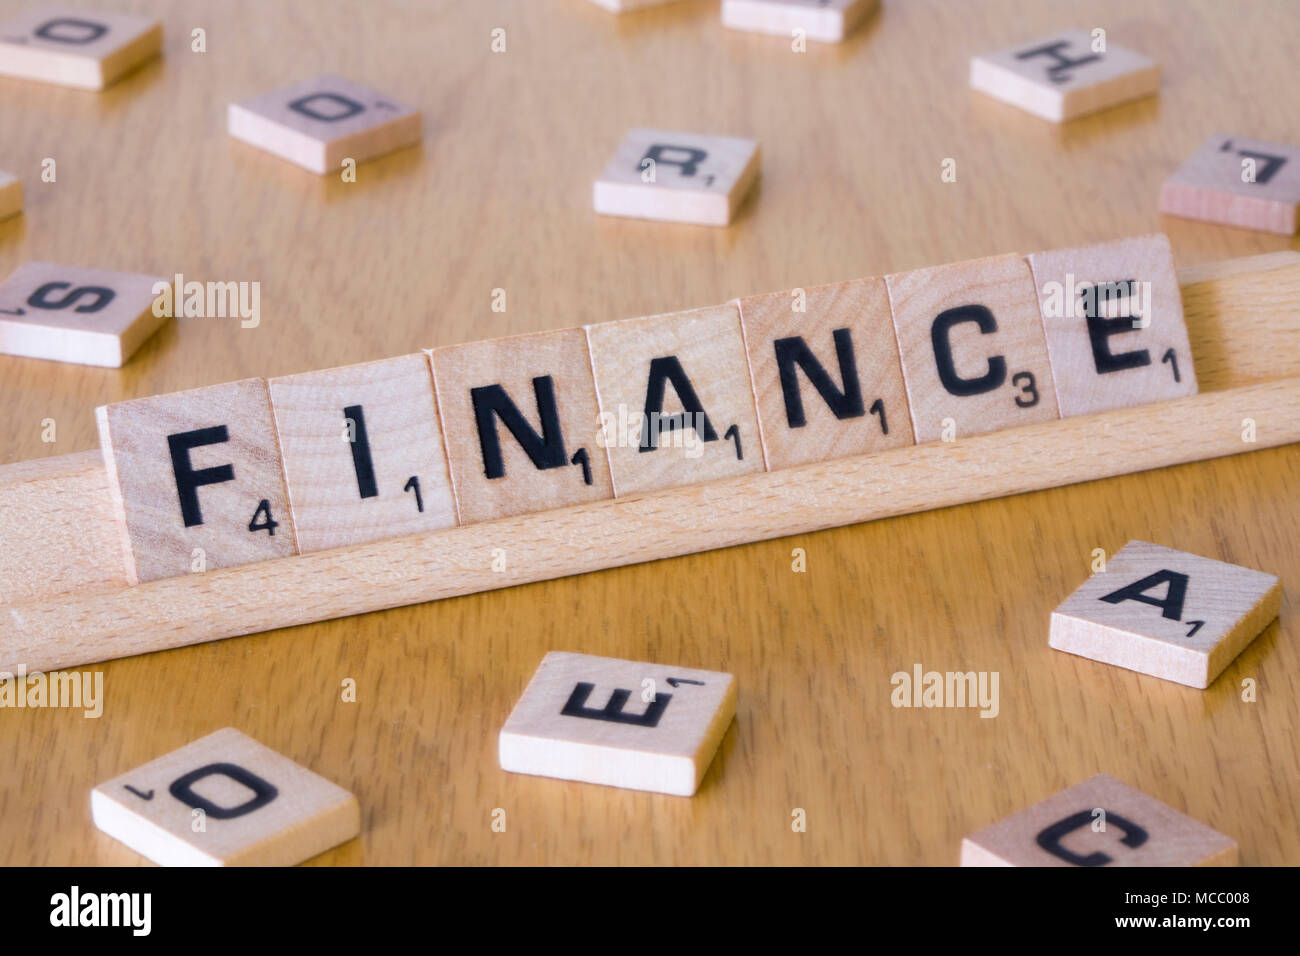 Scrabble letters spelling out the word Finance Stock Photo